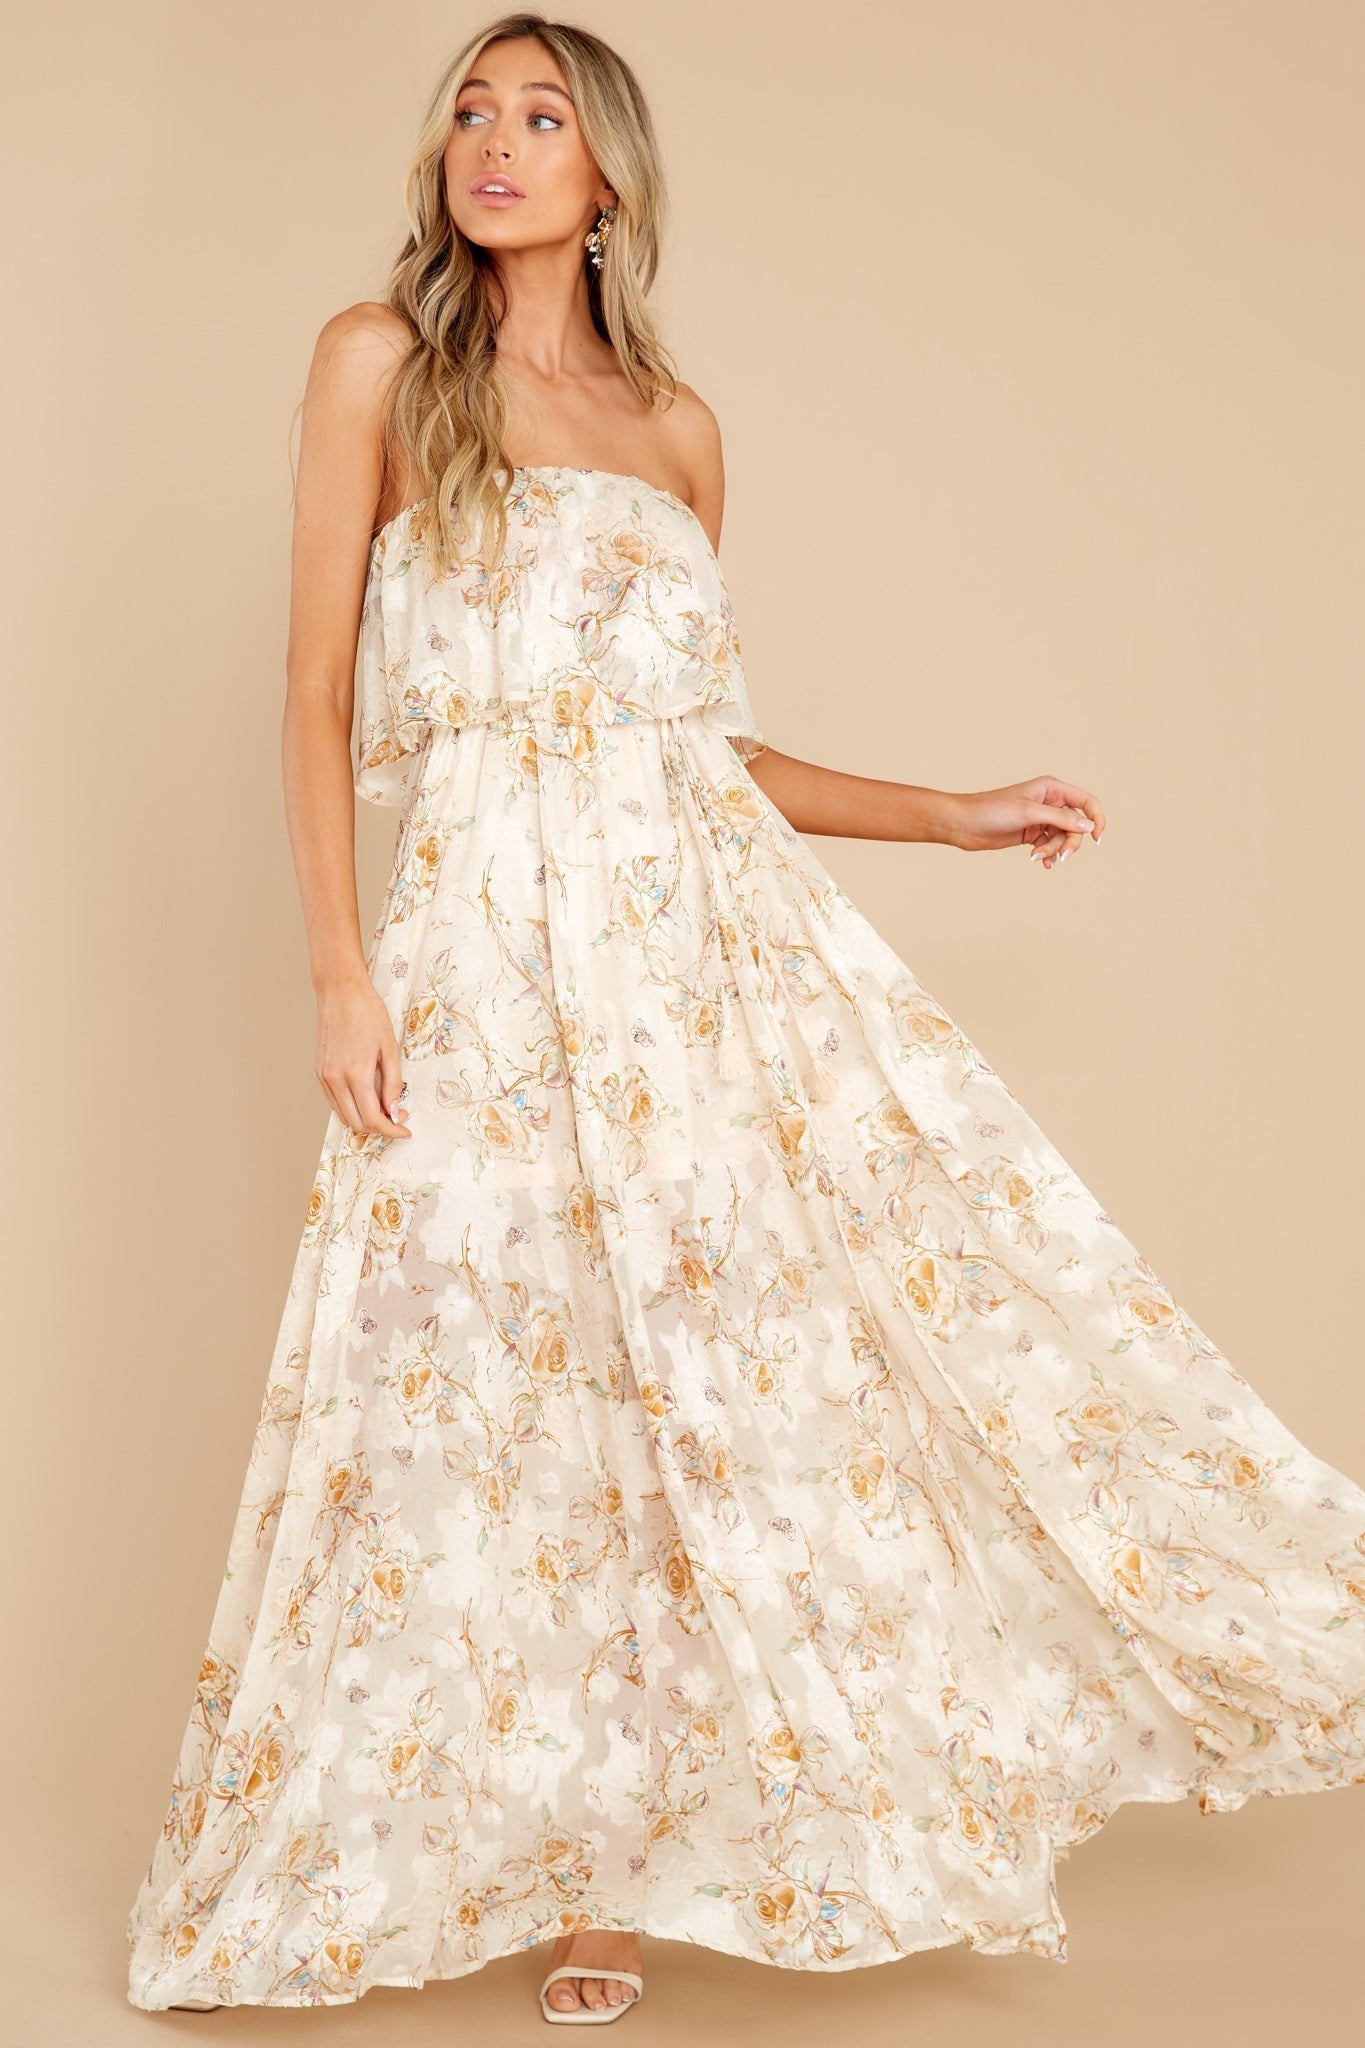 Lovely Vision Ivory Floral Print Maxi Dress - Red Dress